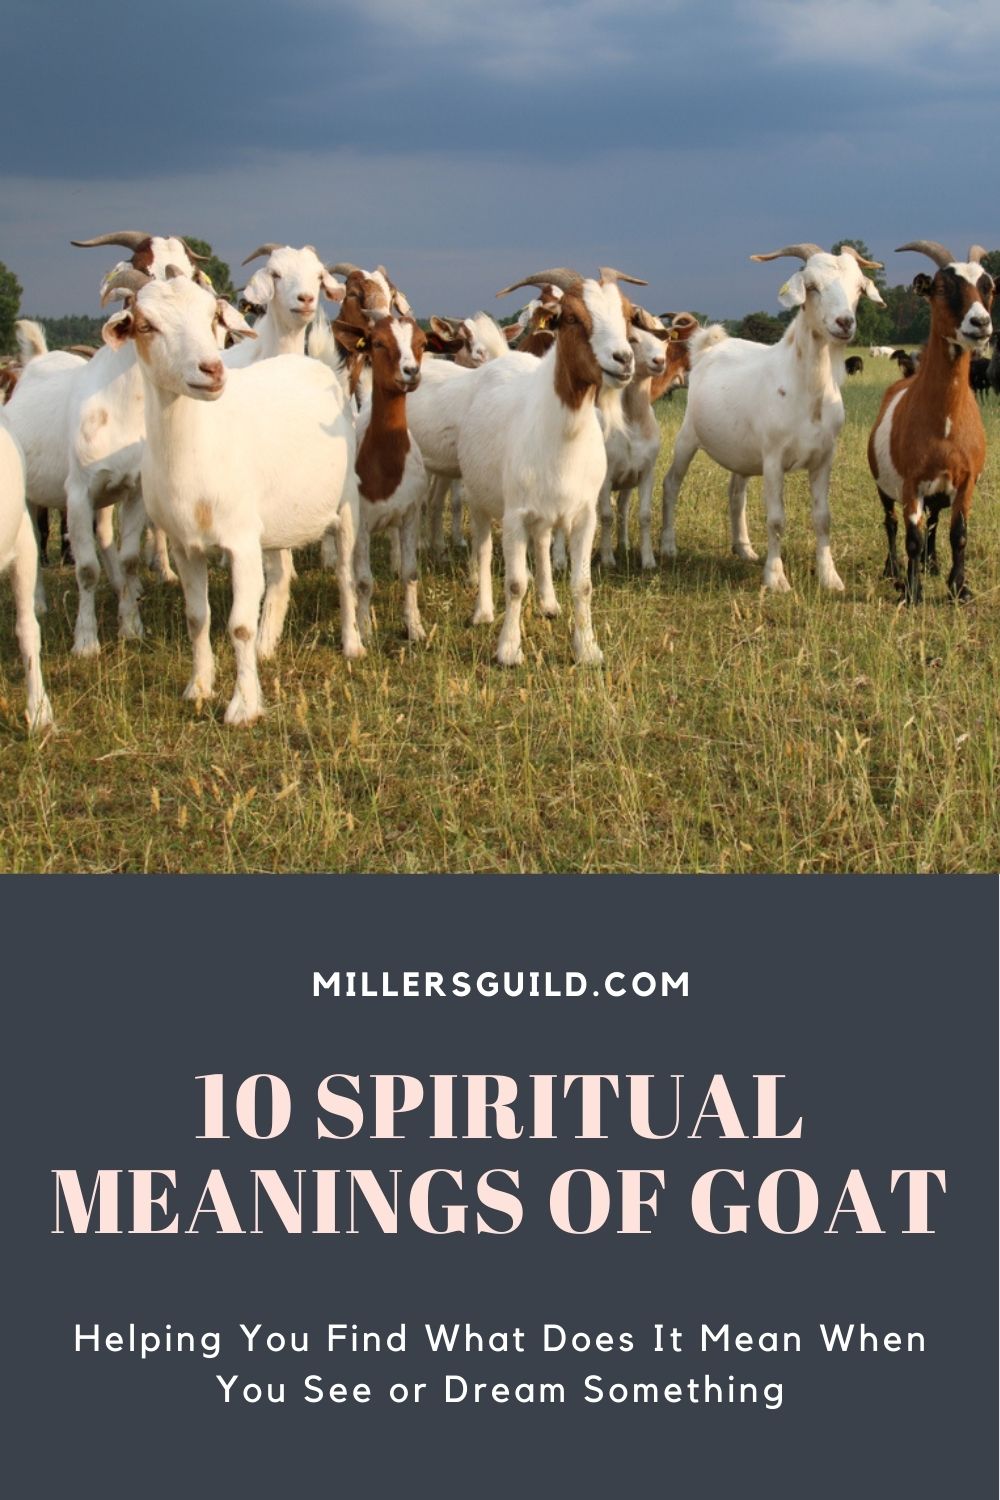 10 Spiritual Meanings of Goat 2